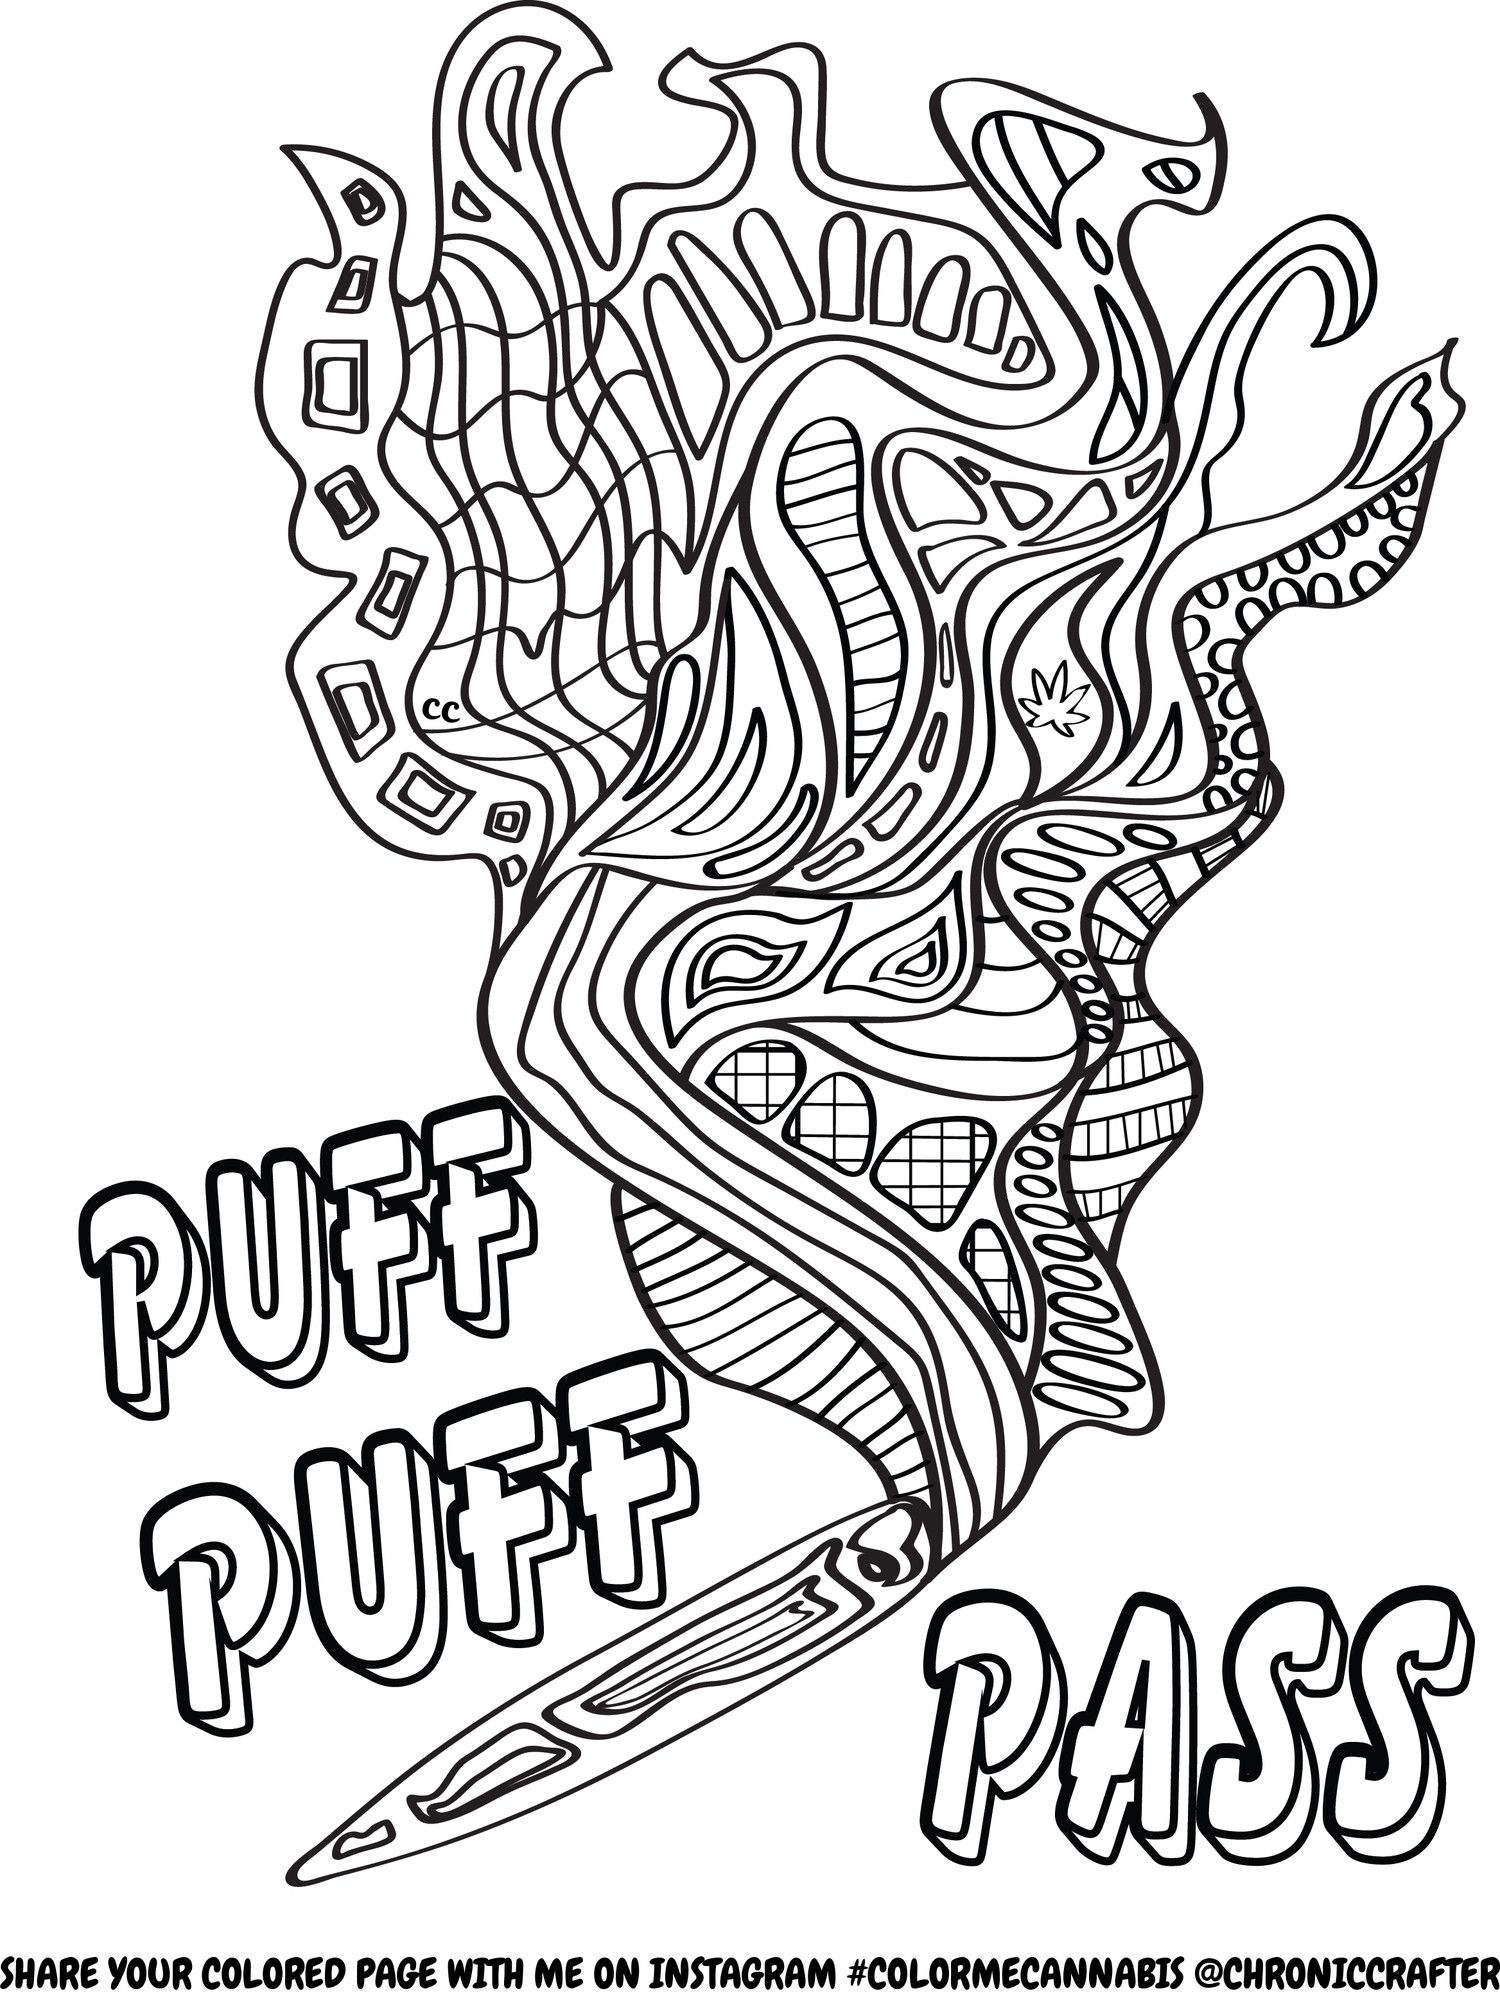 Printable Stoner Coloring Pages
 Free Stoner Coloring Page from Chronic Crafter With